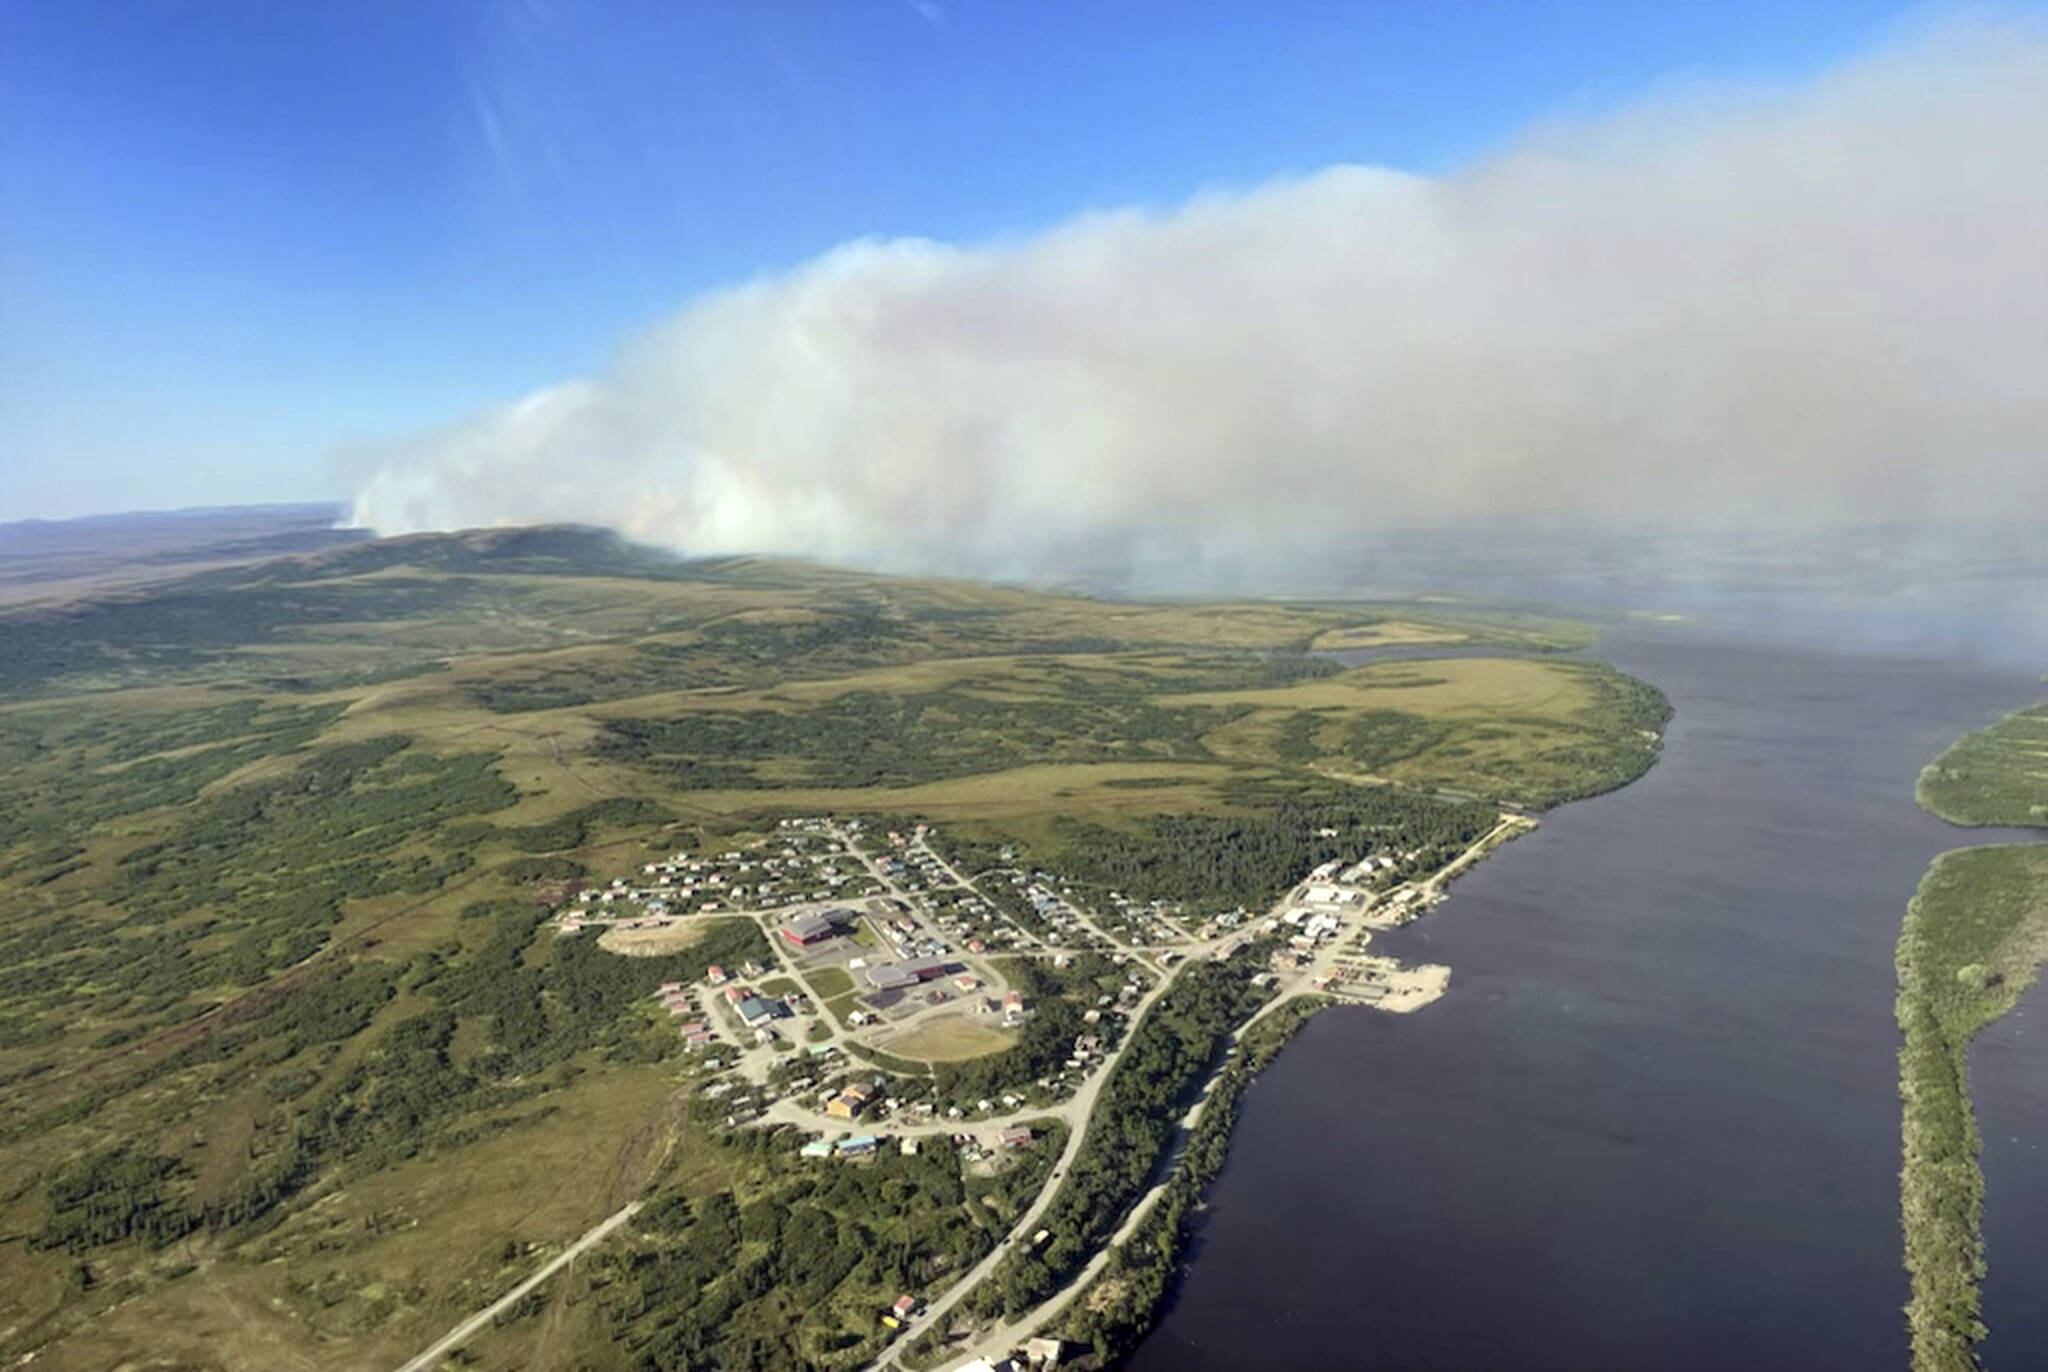 This aerial photo provided by the Bureau of Land Management Alaska Fire Service shows a tundra fire burning near the community of St. Mary's, Alaska, on June 10, 2022. Alaska's remarkable wildfire season includes over 530 blazes that have burned an area more than three times the size of Rhode Island, with nearly all the impacts, including dangerous breathing conditions from smoke, attributed to fires started by lightning. (Ryan McPherson / Bureau of Land Management Alaska Fire Service)